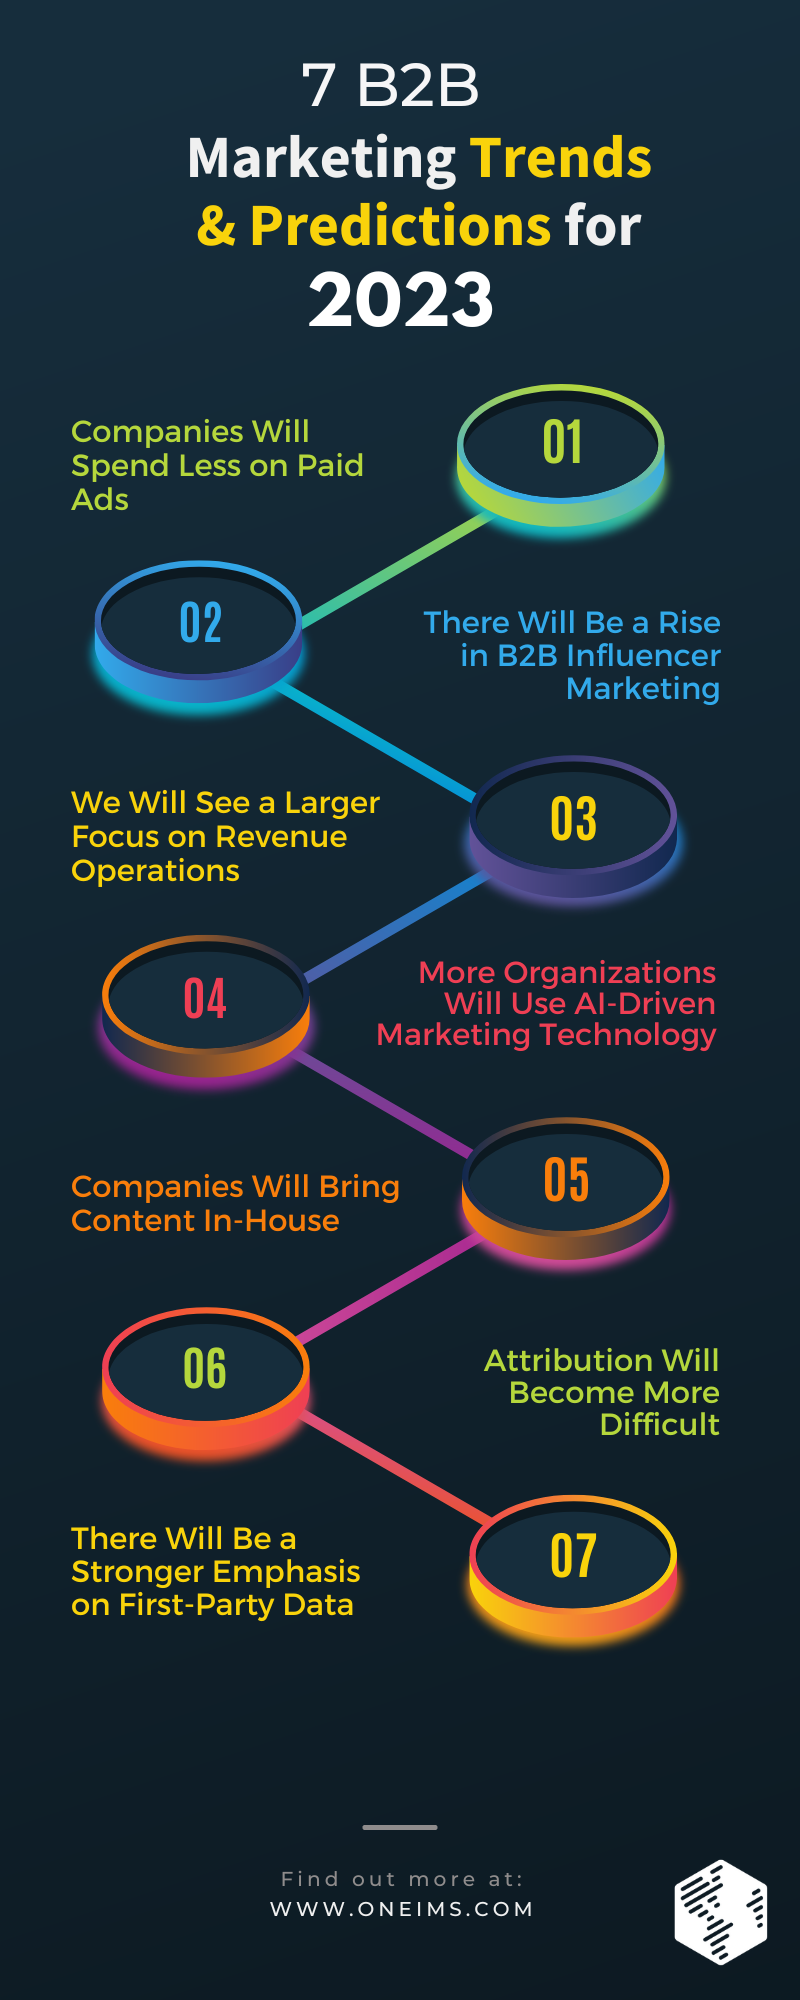 B2B Marketing Trends and Predictions 2023 [infographic]